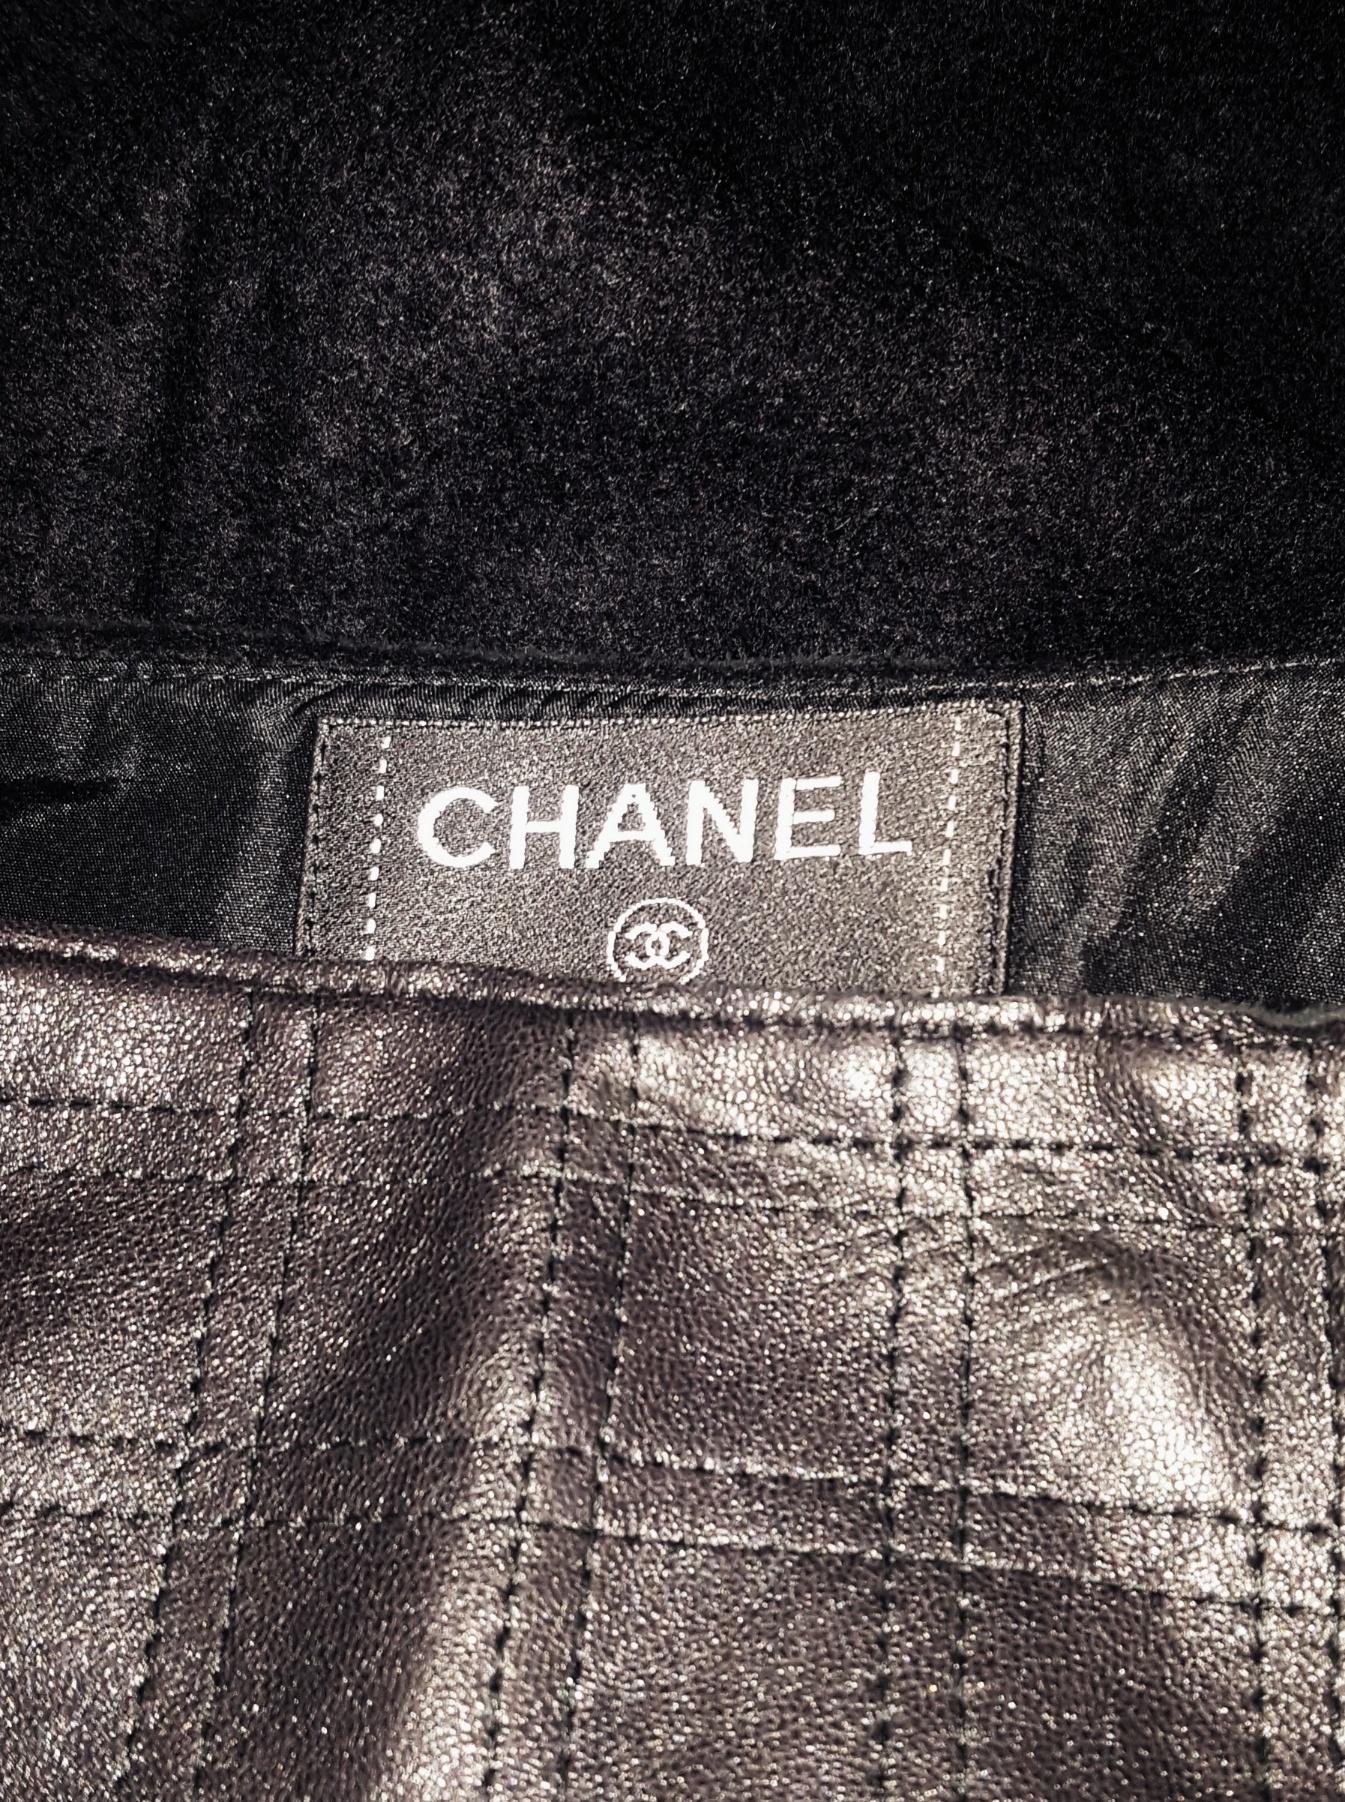 Chanel Black Wool Skirt W/ Leather Trim At Hip & Front of Skirt  2